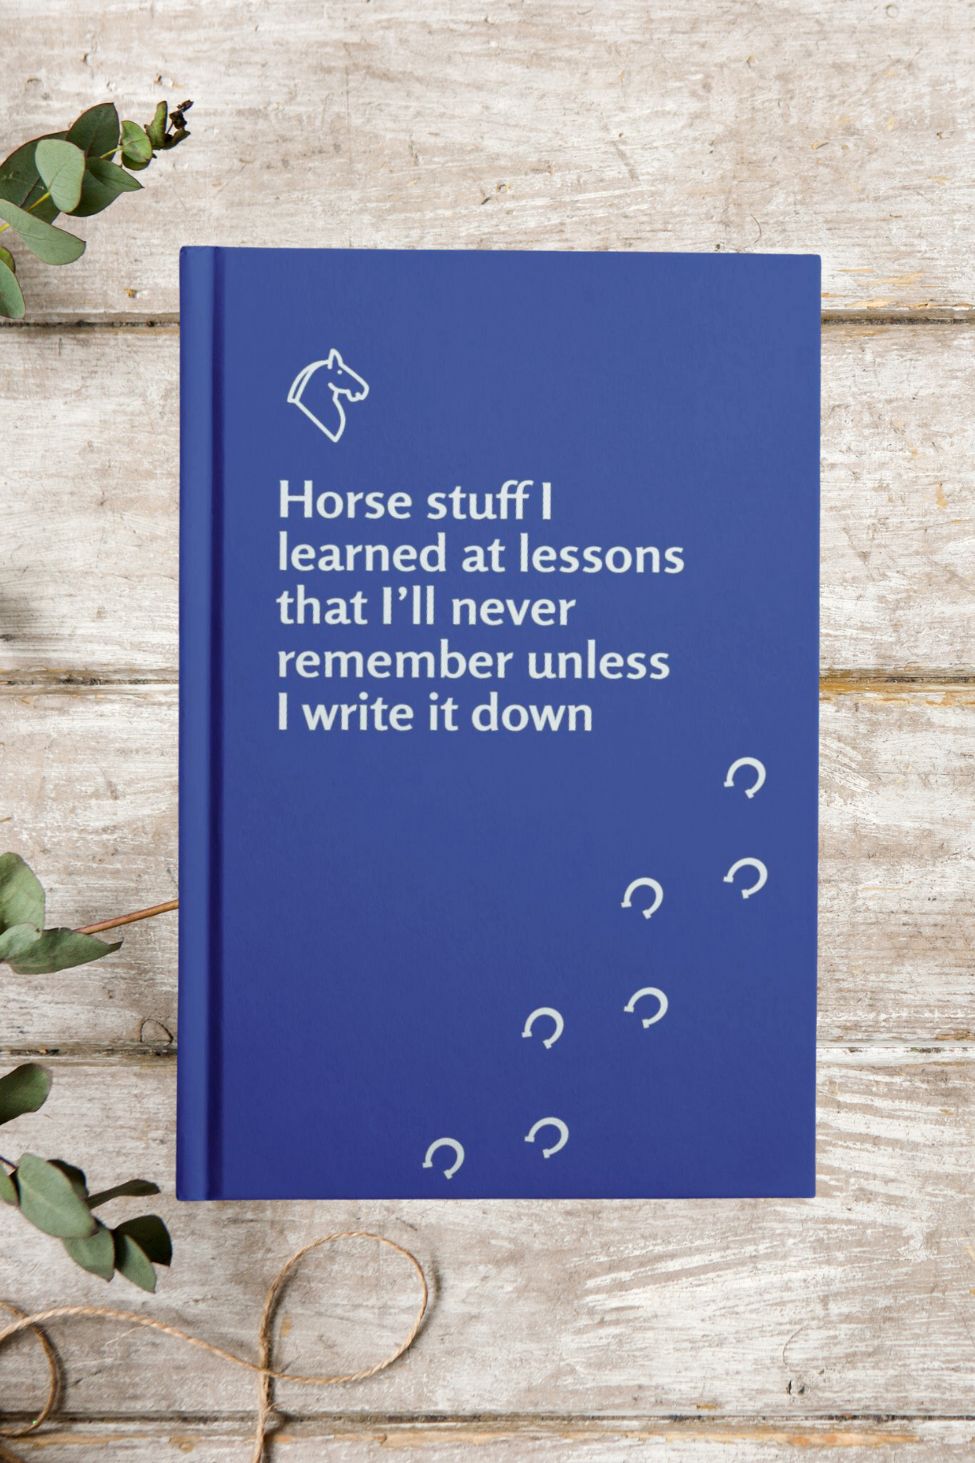 Horse stuff I learned at lessons that I’ll never remember unless I write it down - Hardcover lined notebook